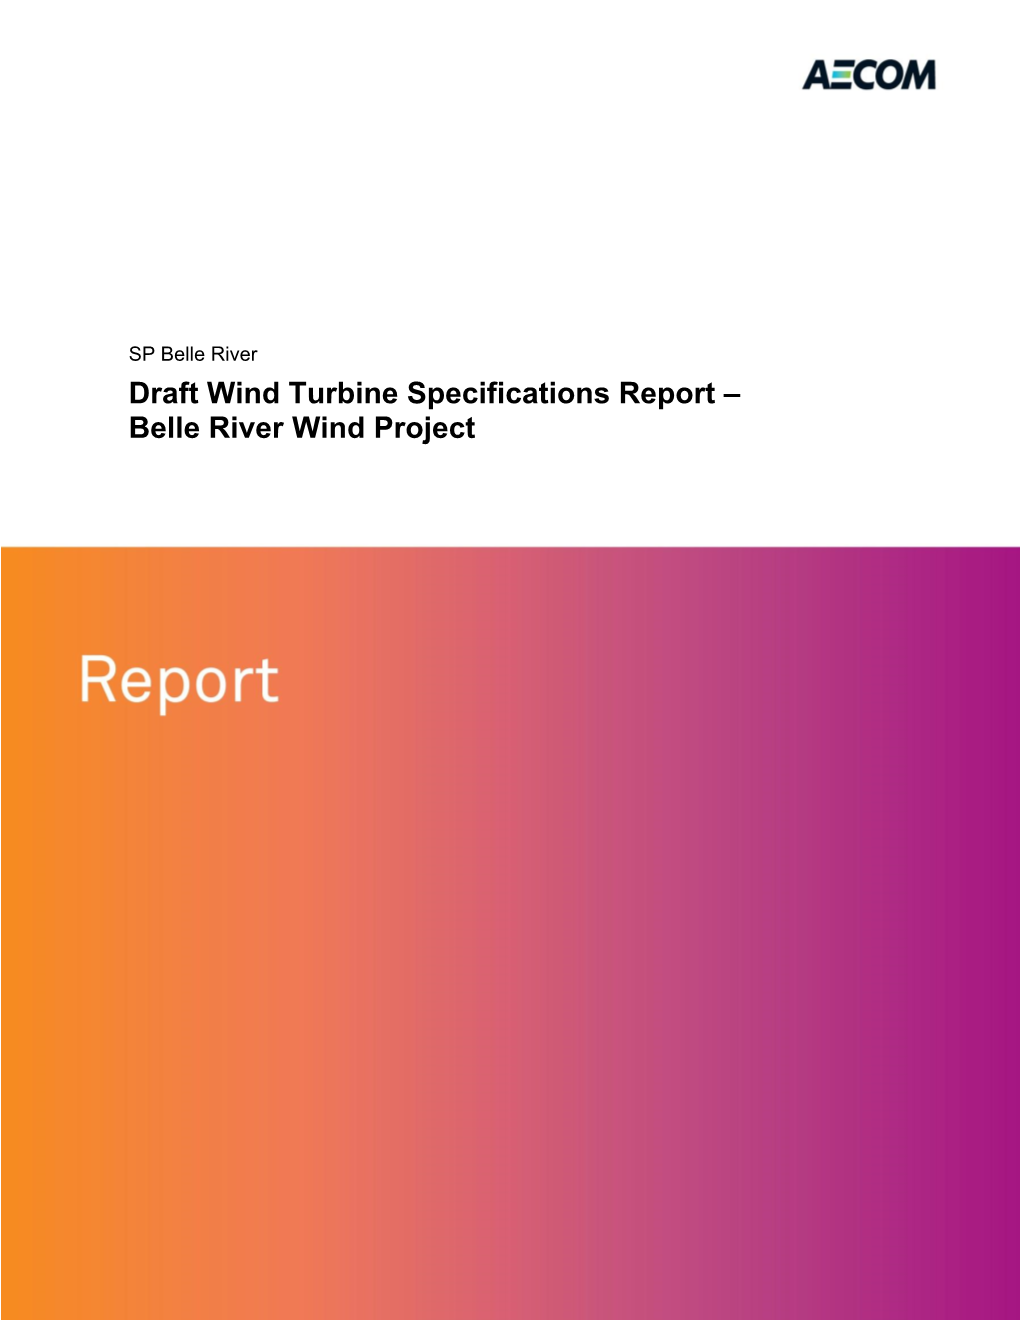 Draft Wind Turbine Specifications Report – Belle River Wind Project